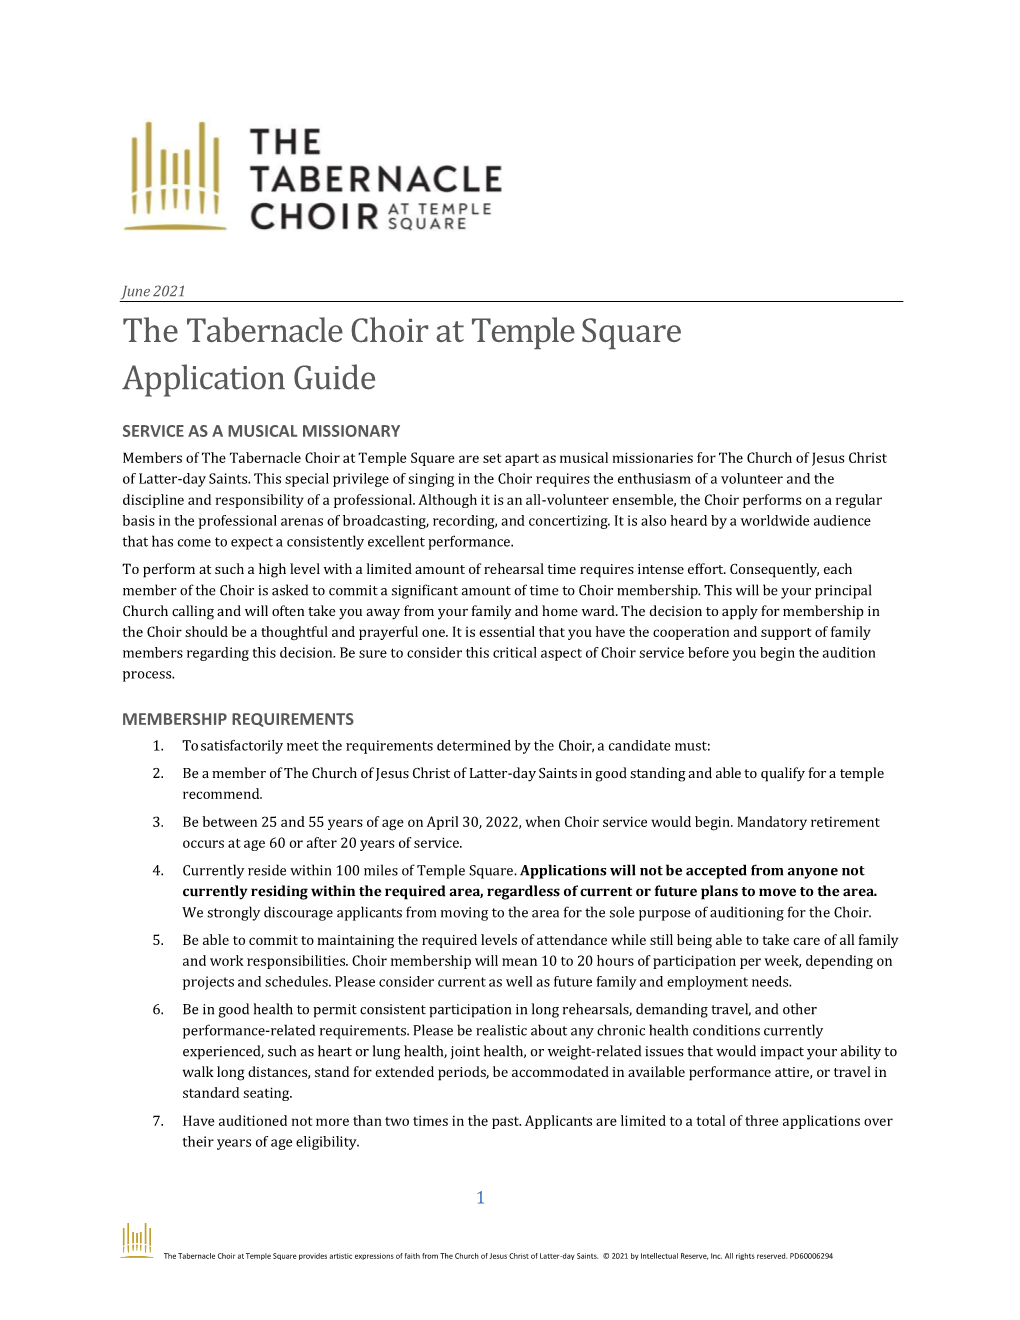 The Tabernacle Choir at Temple Square Application Guide